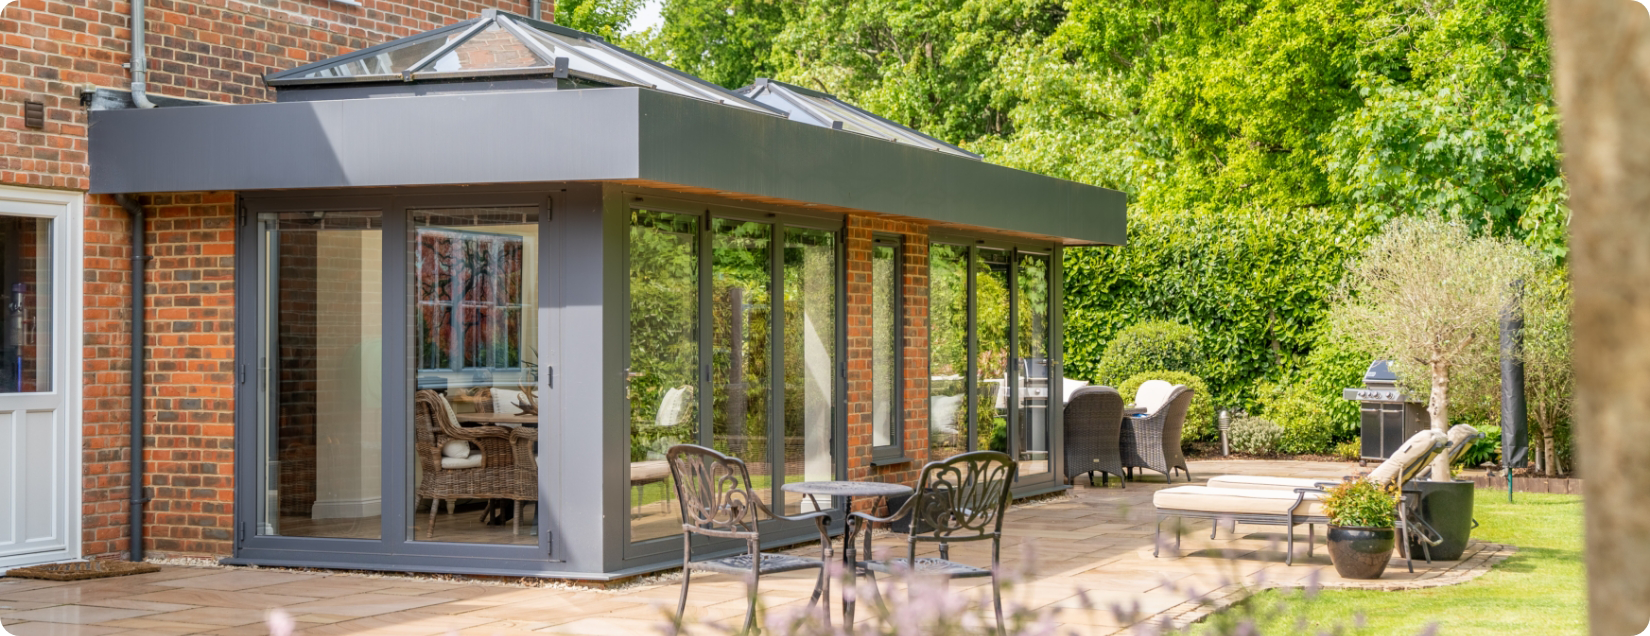 Stunning orangery with grey framework to the doors and windows and roof lanterns.